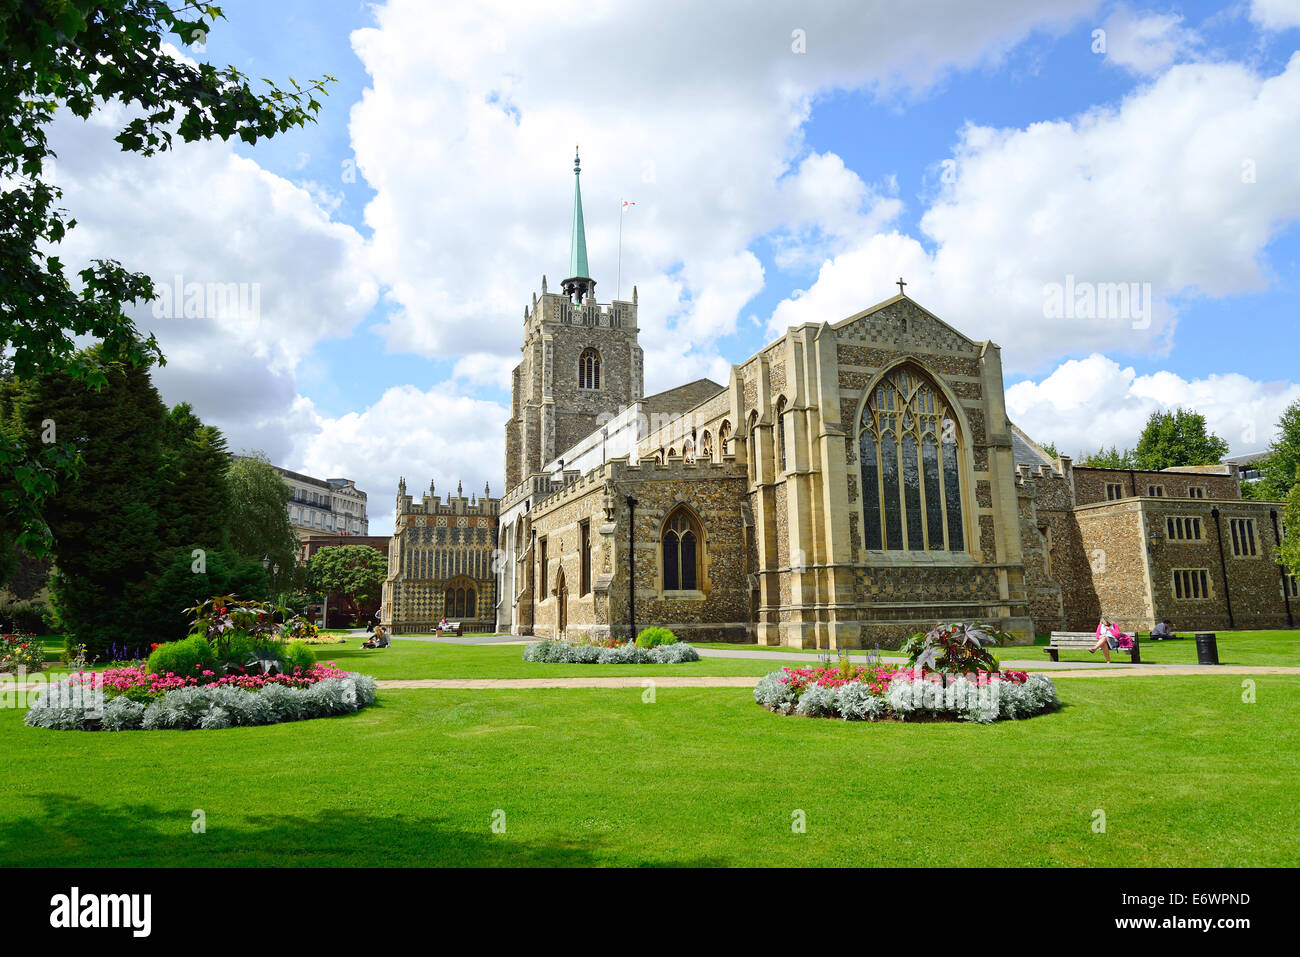 Chelmsford Cathedral (Church of St Mary the Virgin, St Peter and St Cedd), Chelmsford, Essex, England, United Kingdom Stock Photo